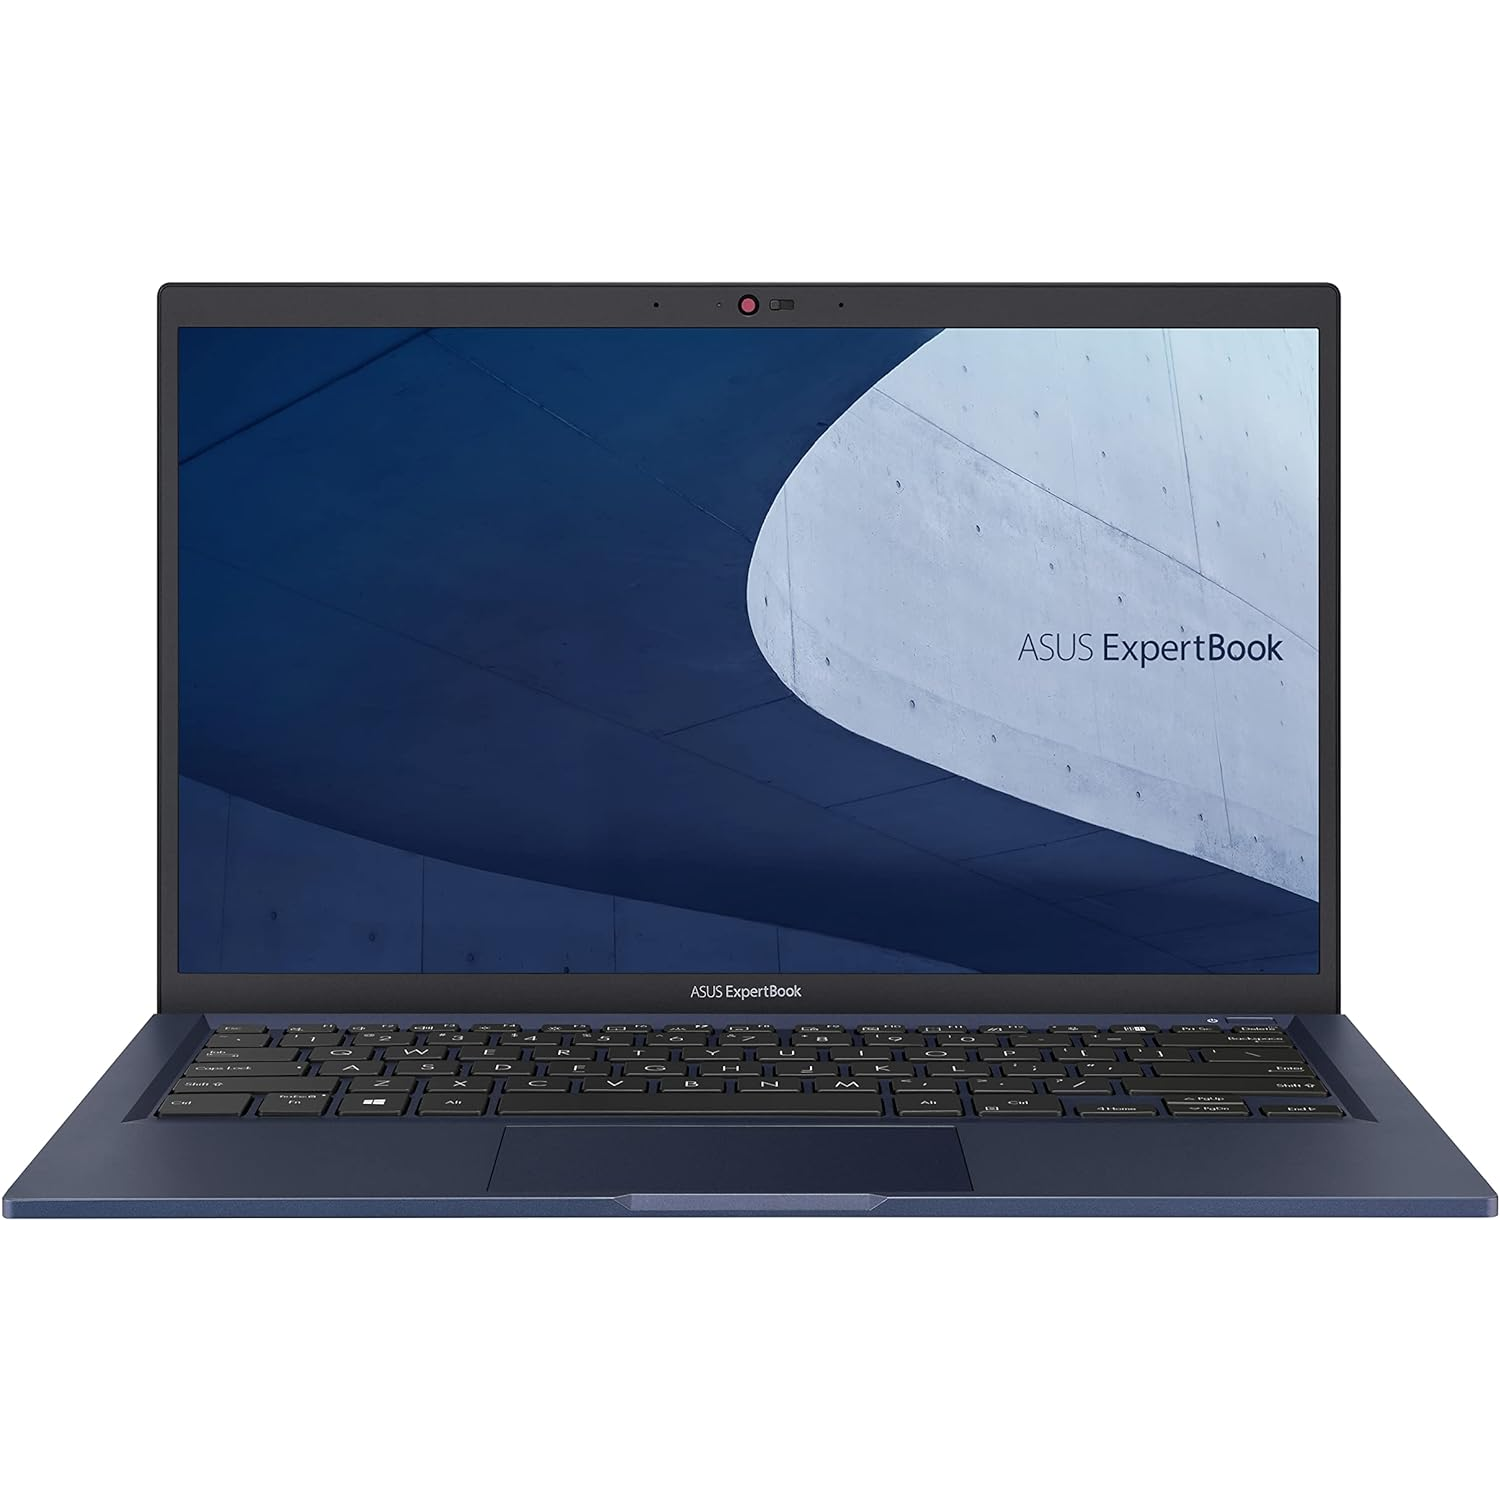 Asus ExpertBook B1 14" FHD, Intel i5-1135G7 (4-Cores) 16GB RAM, 500GB NVMe SSD, WiFi 6, Military Grade Business Laptop, Win 10 Pro (upgradable to 11)